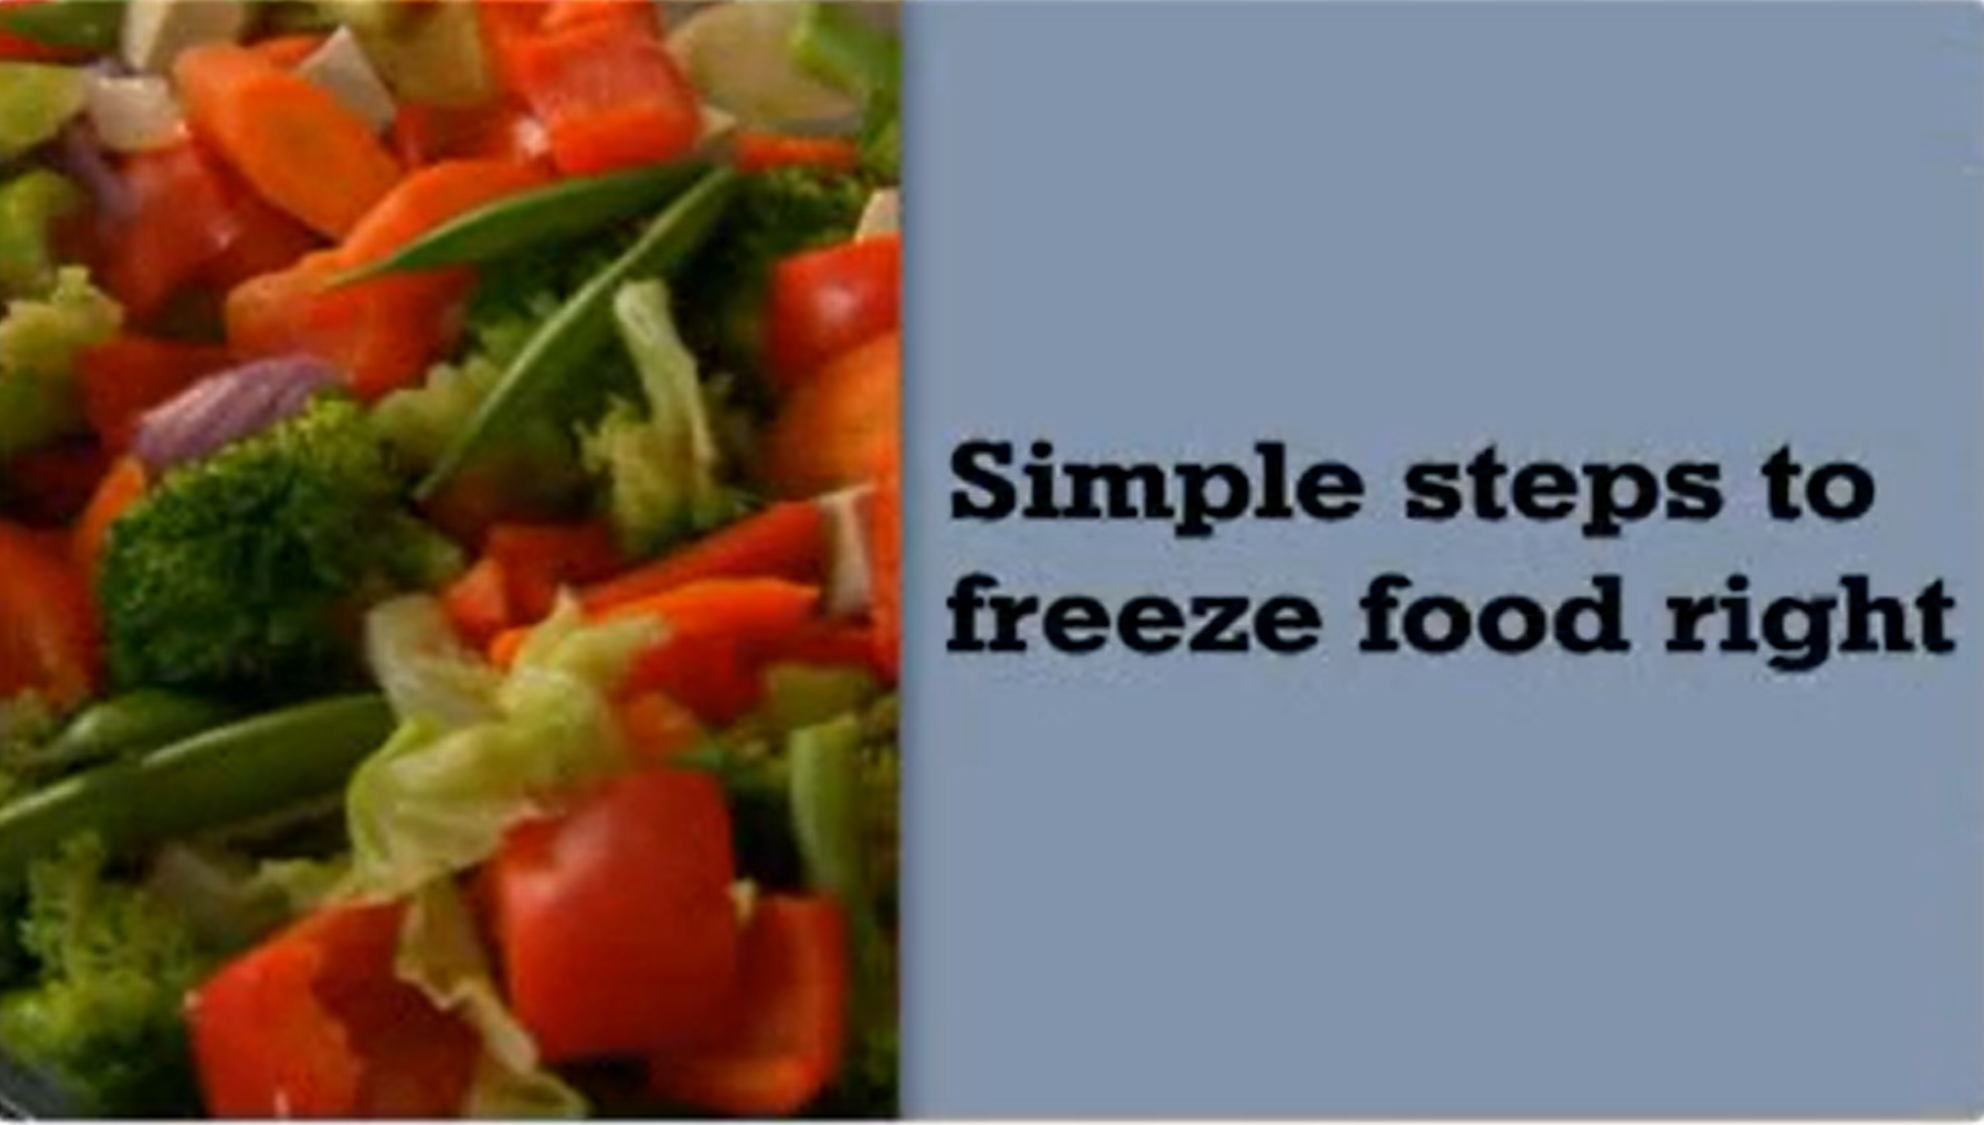 Simple steps to freeze food right